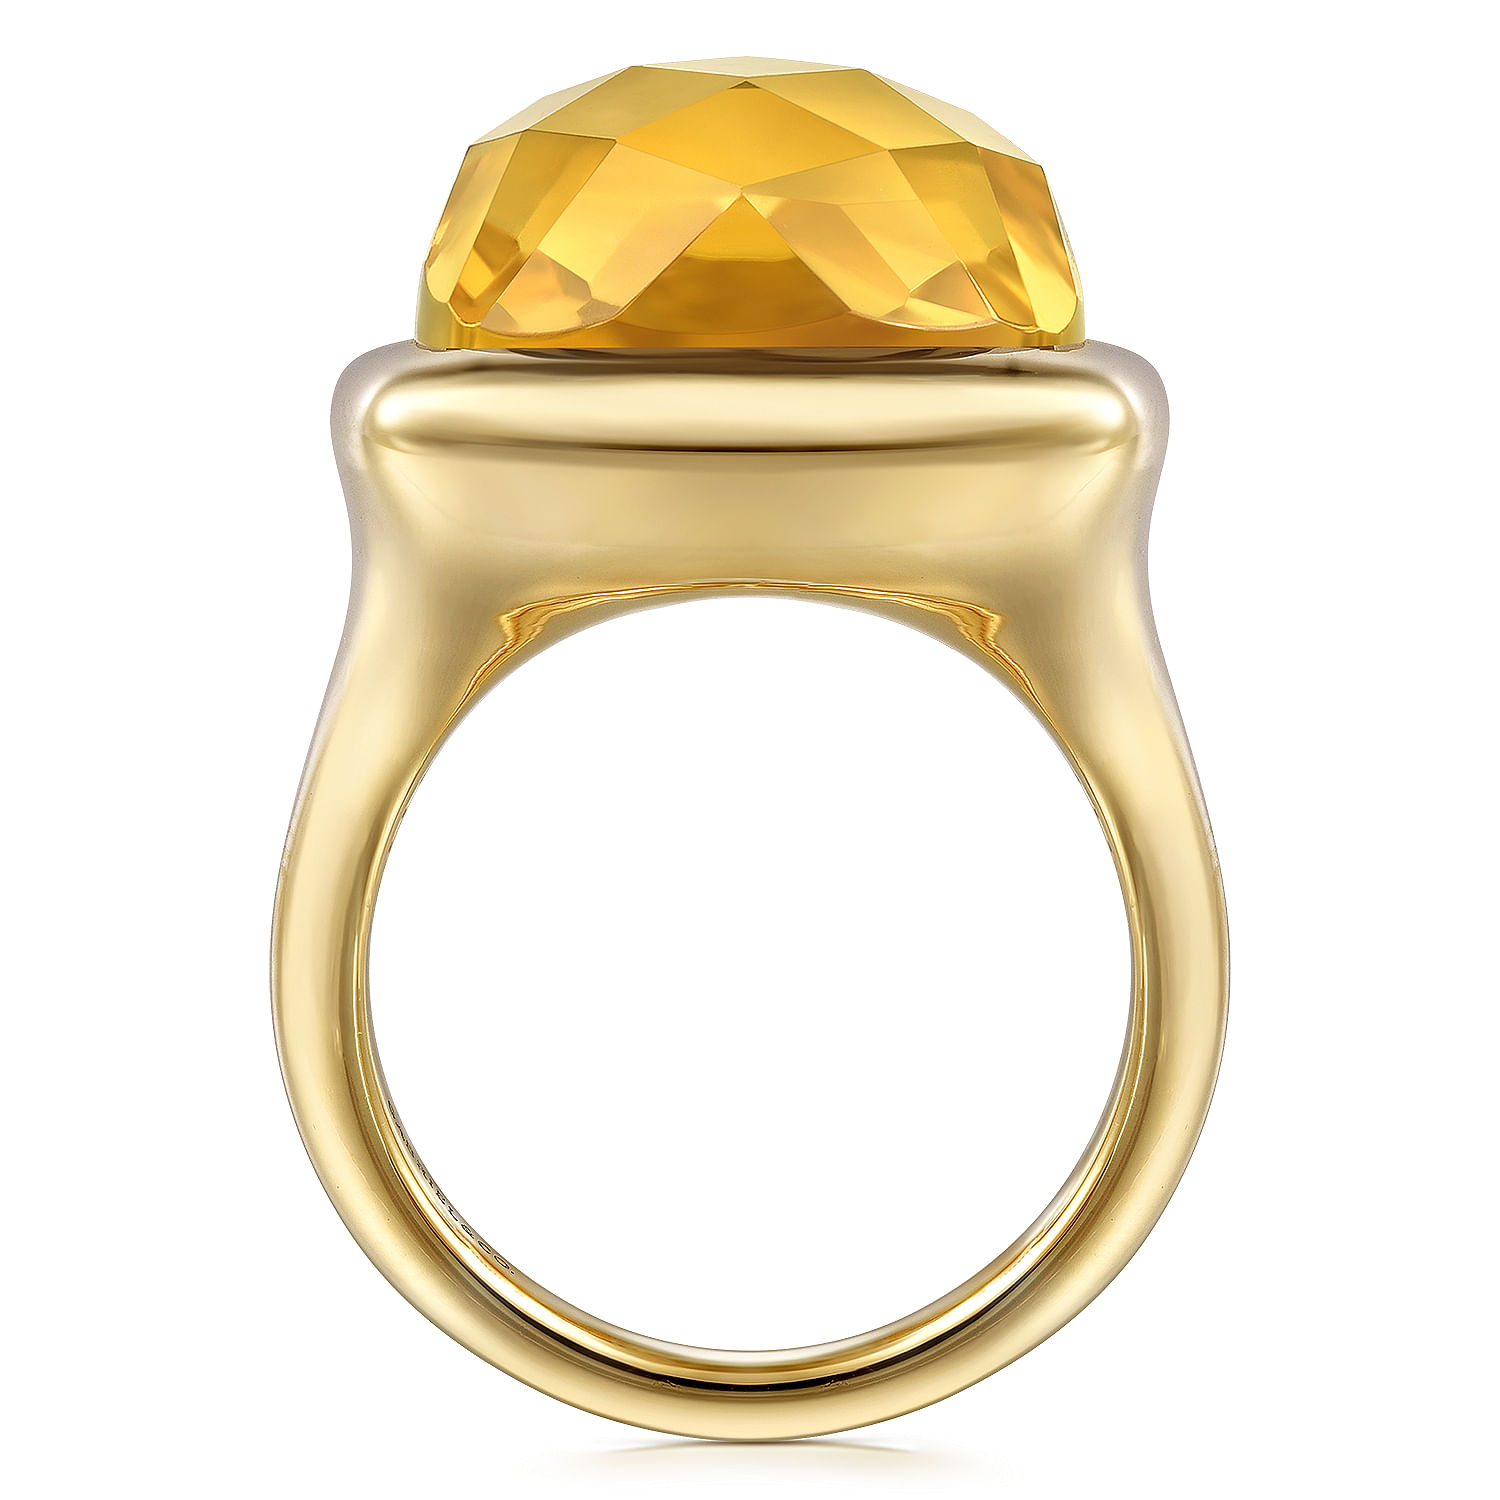 14K Yellow Gold Cushion Cut Citrine Ladies Ring With Flower Pattern J-Back